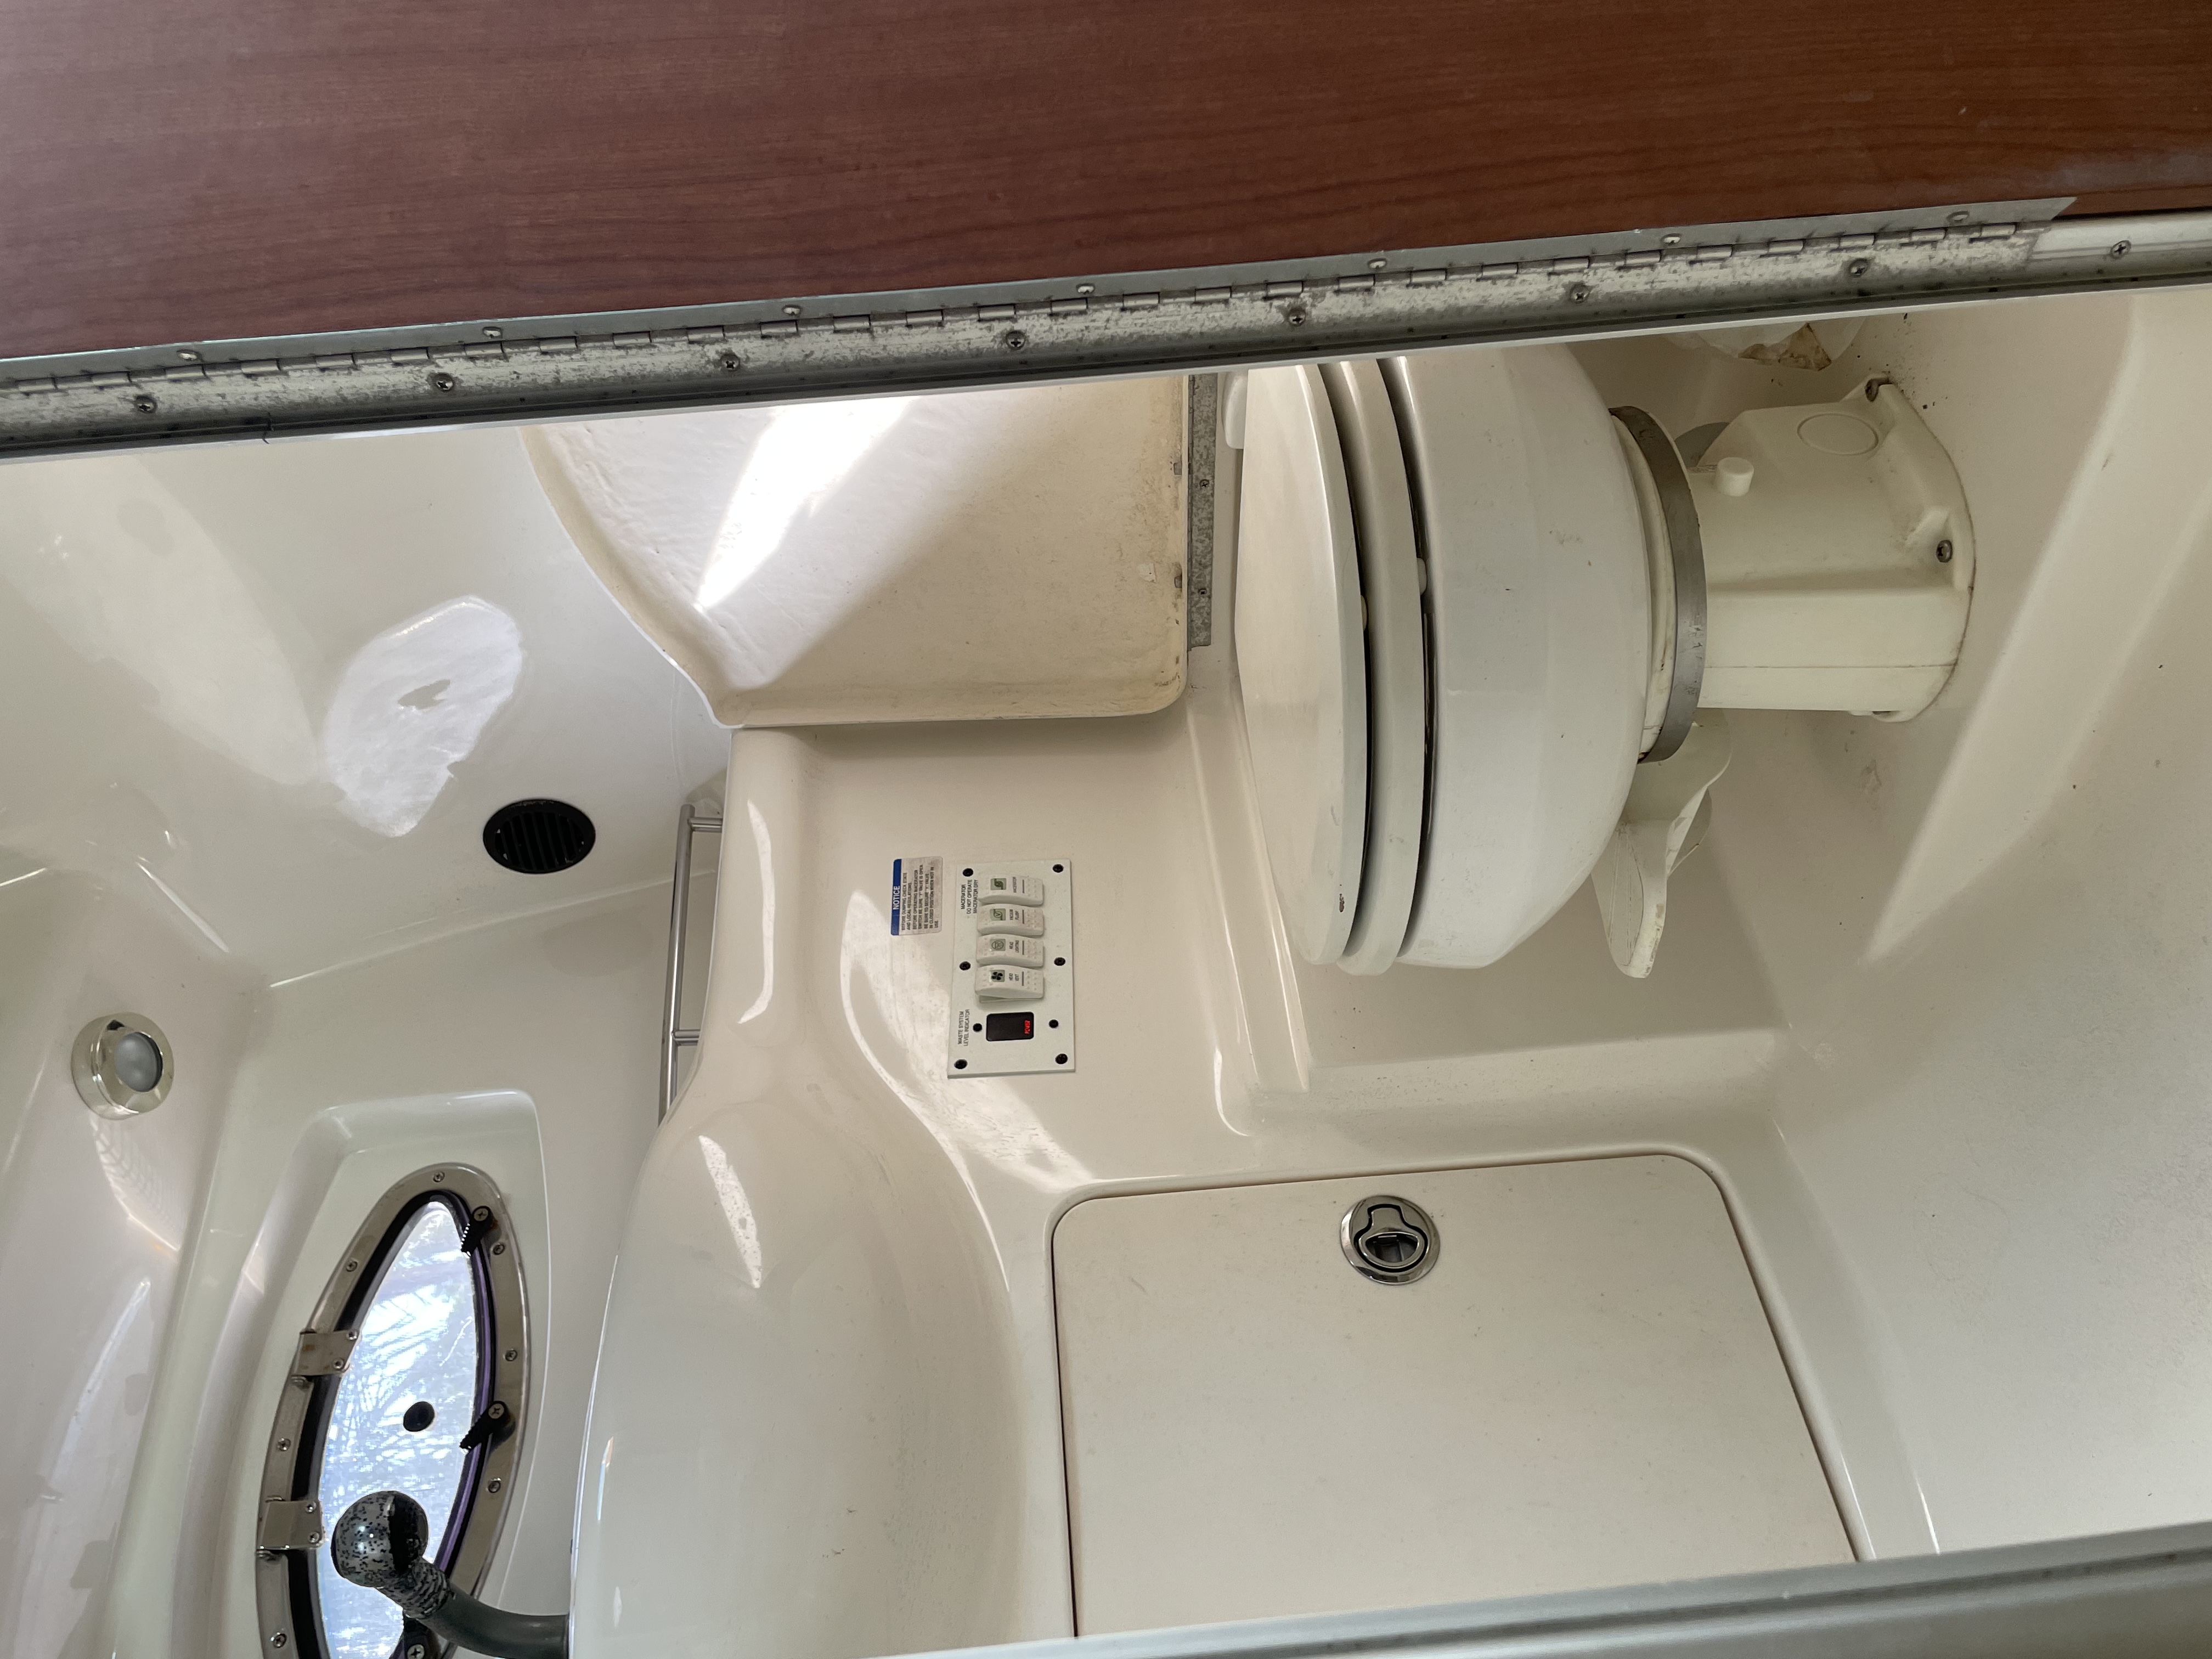 2003 Chaparral Signature 280 Power boat for sale in Jacksonville, FL - image 8 